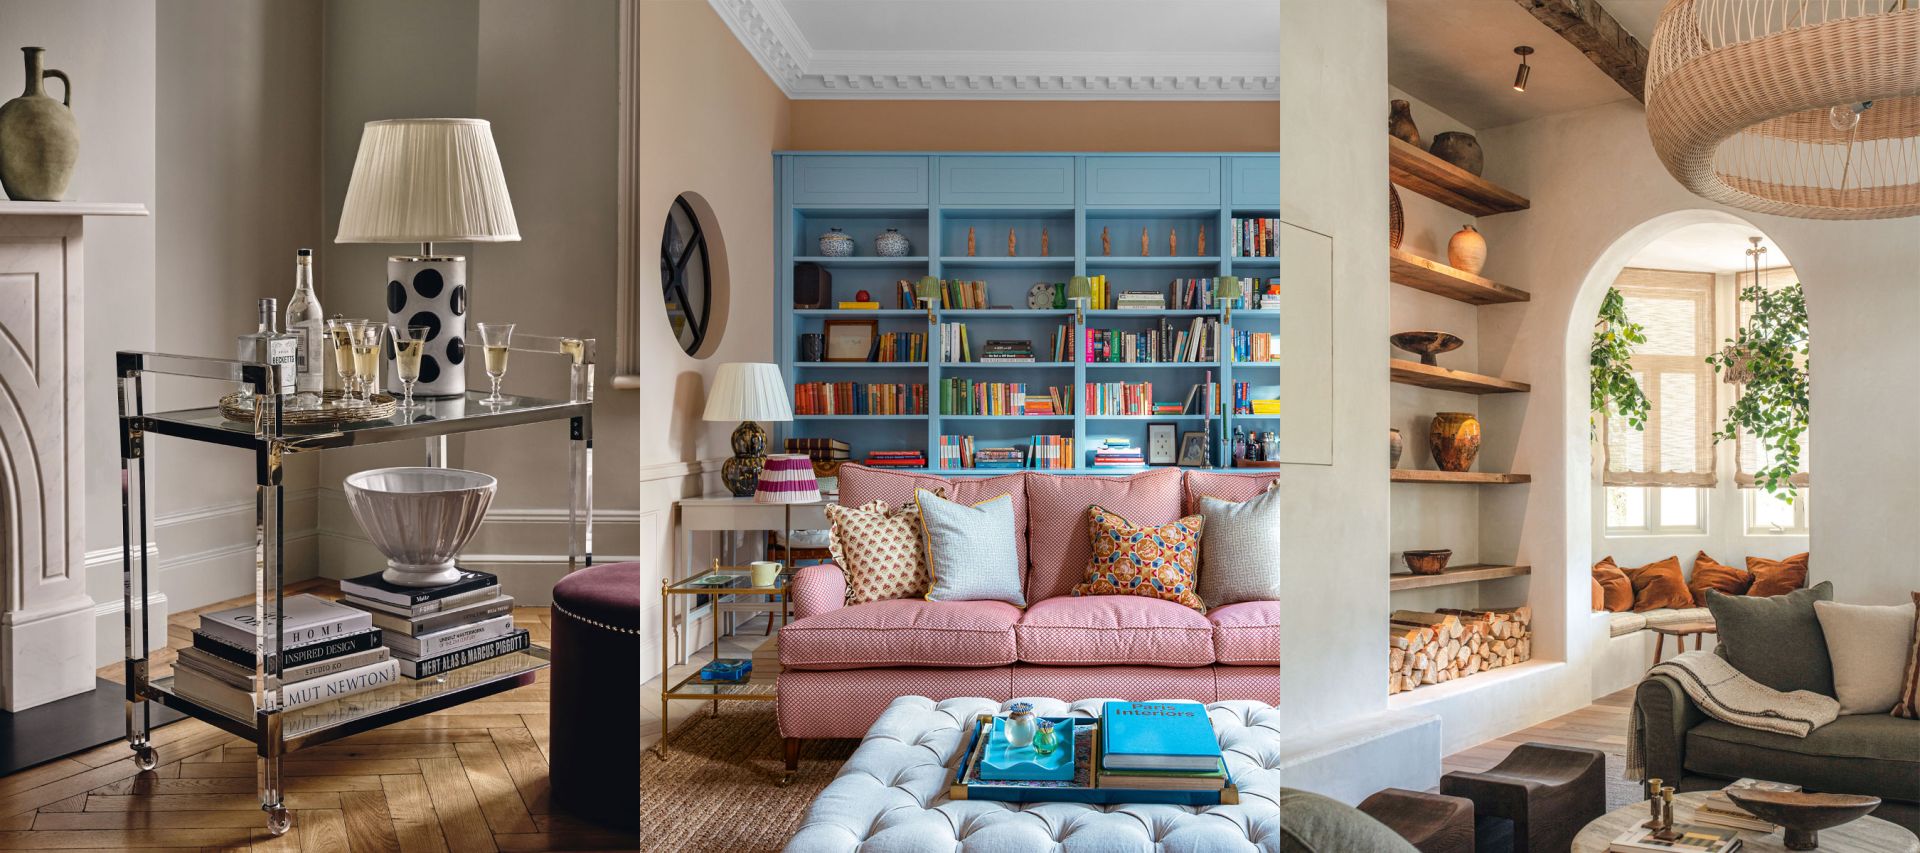 Living room storage ideas – 15 ways to establish a smart and stylish space